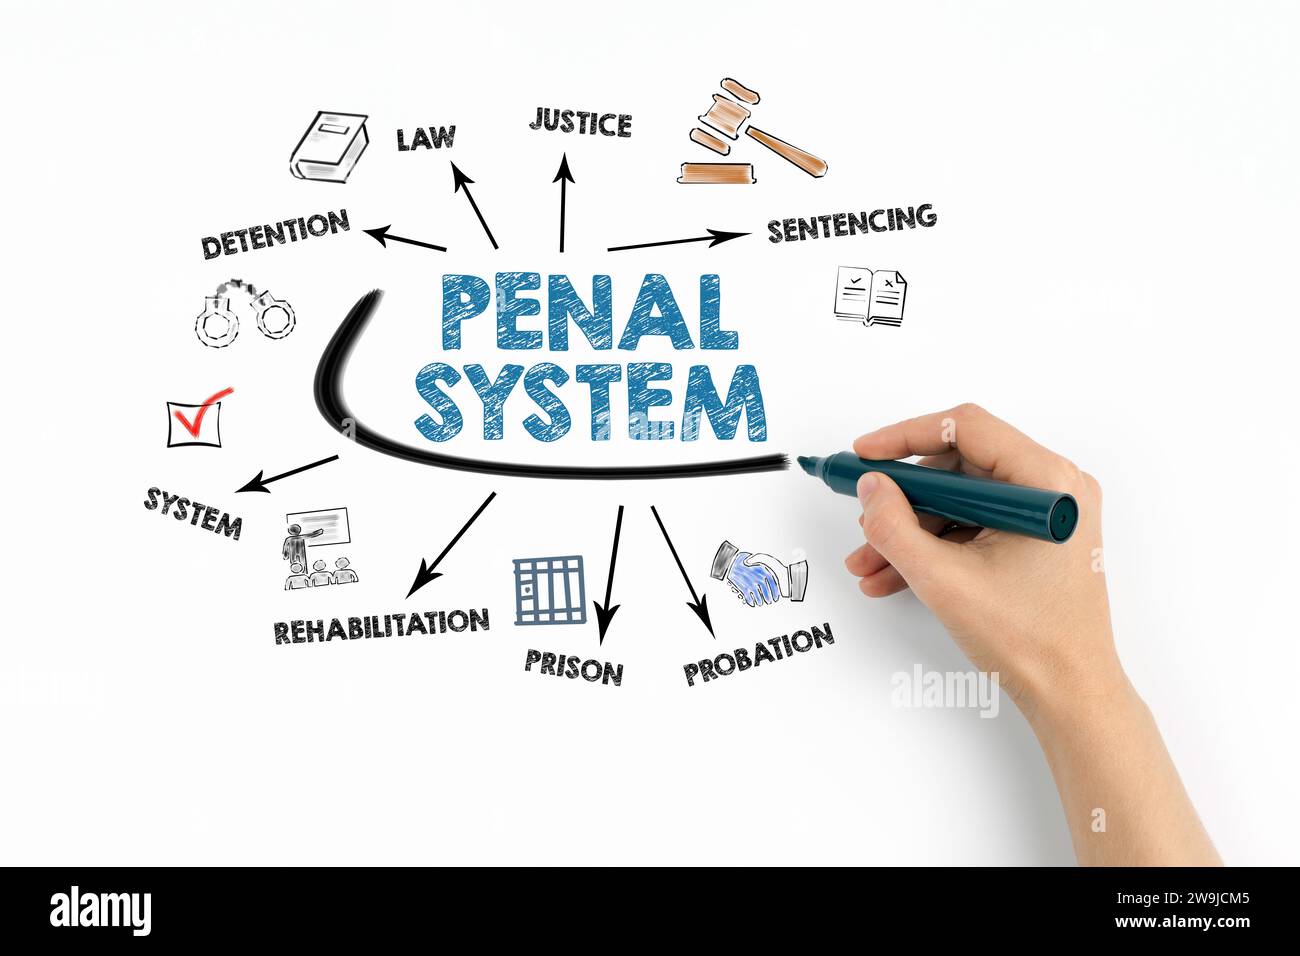 Penal System Concept. Chart with keywords and icons on white background. Stock Photo